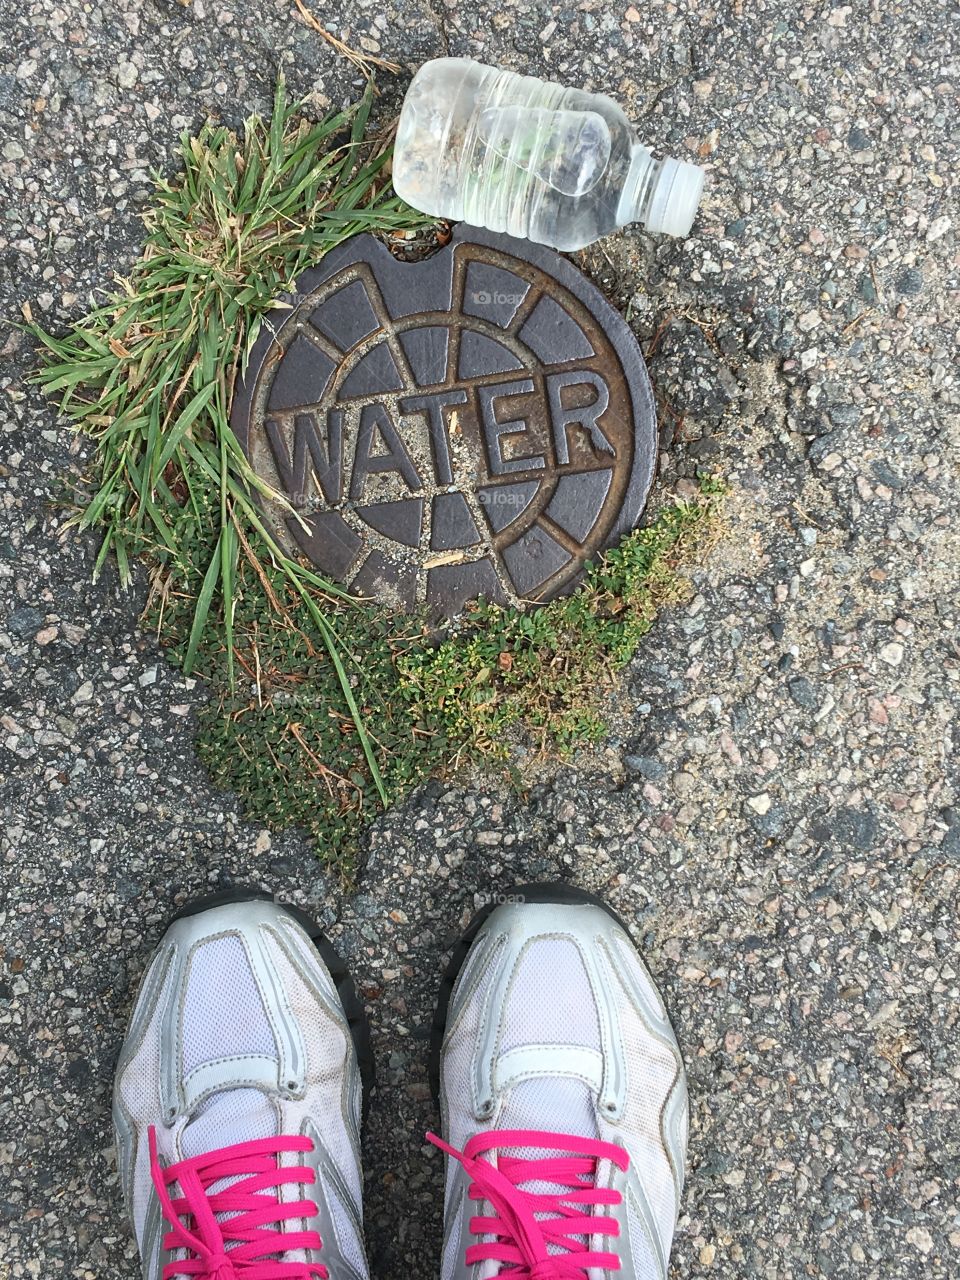 Water break during my walk, crossing one of the little side streets. Such a hot & humid day - got to keep your sense of humor!